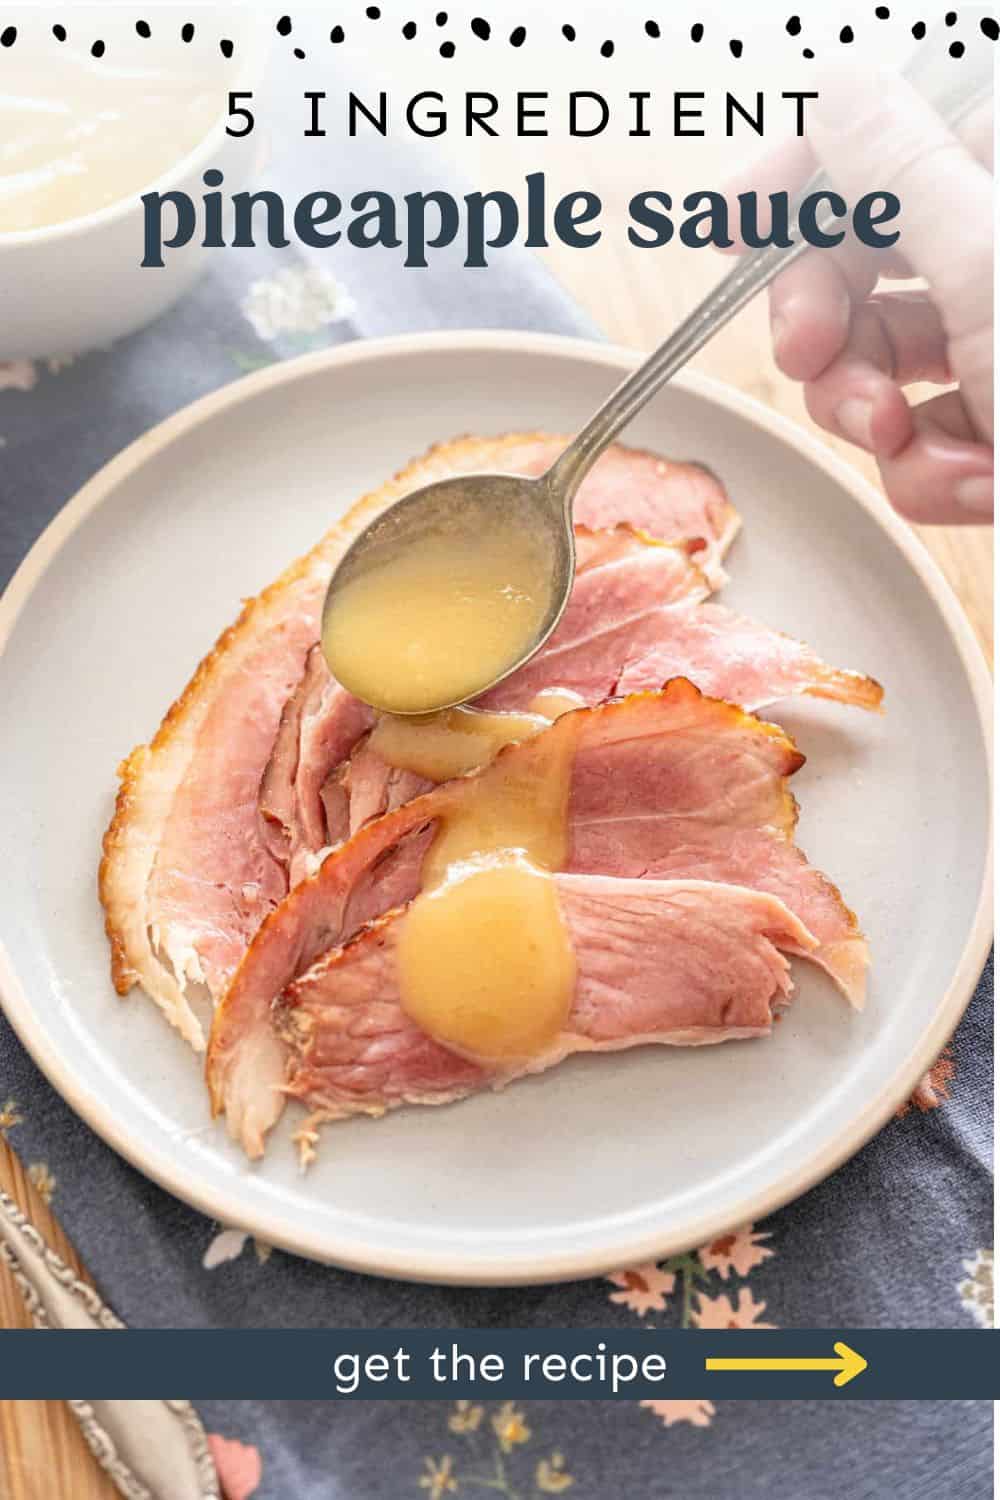 pineapple sauce being drizzled over ham slices.